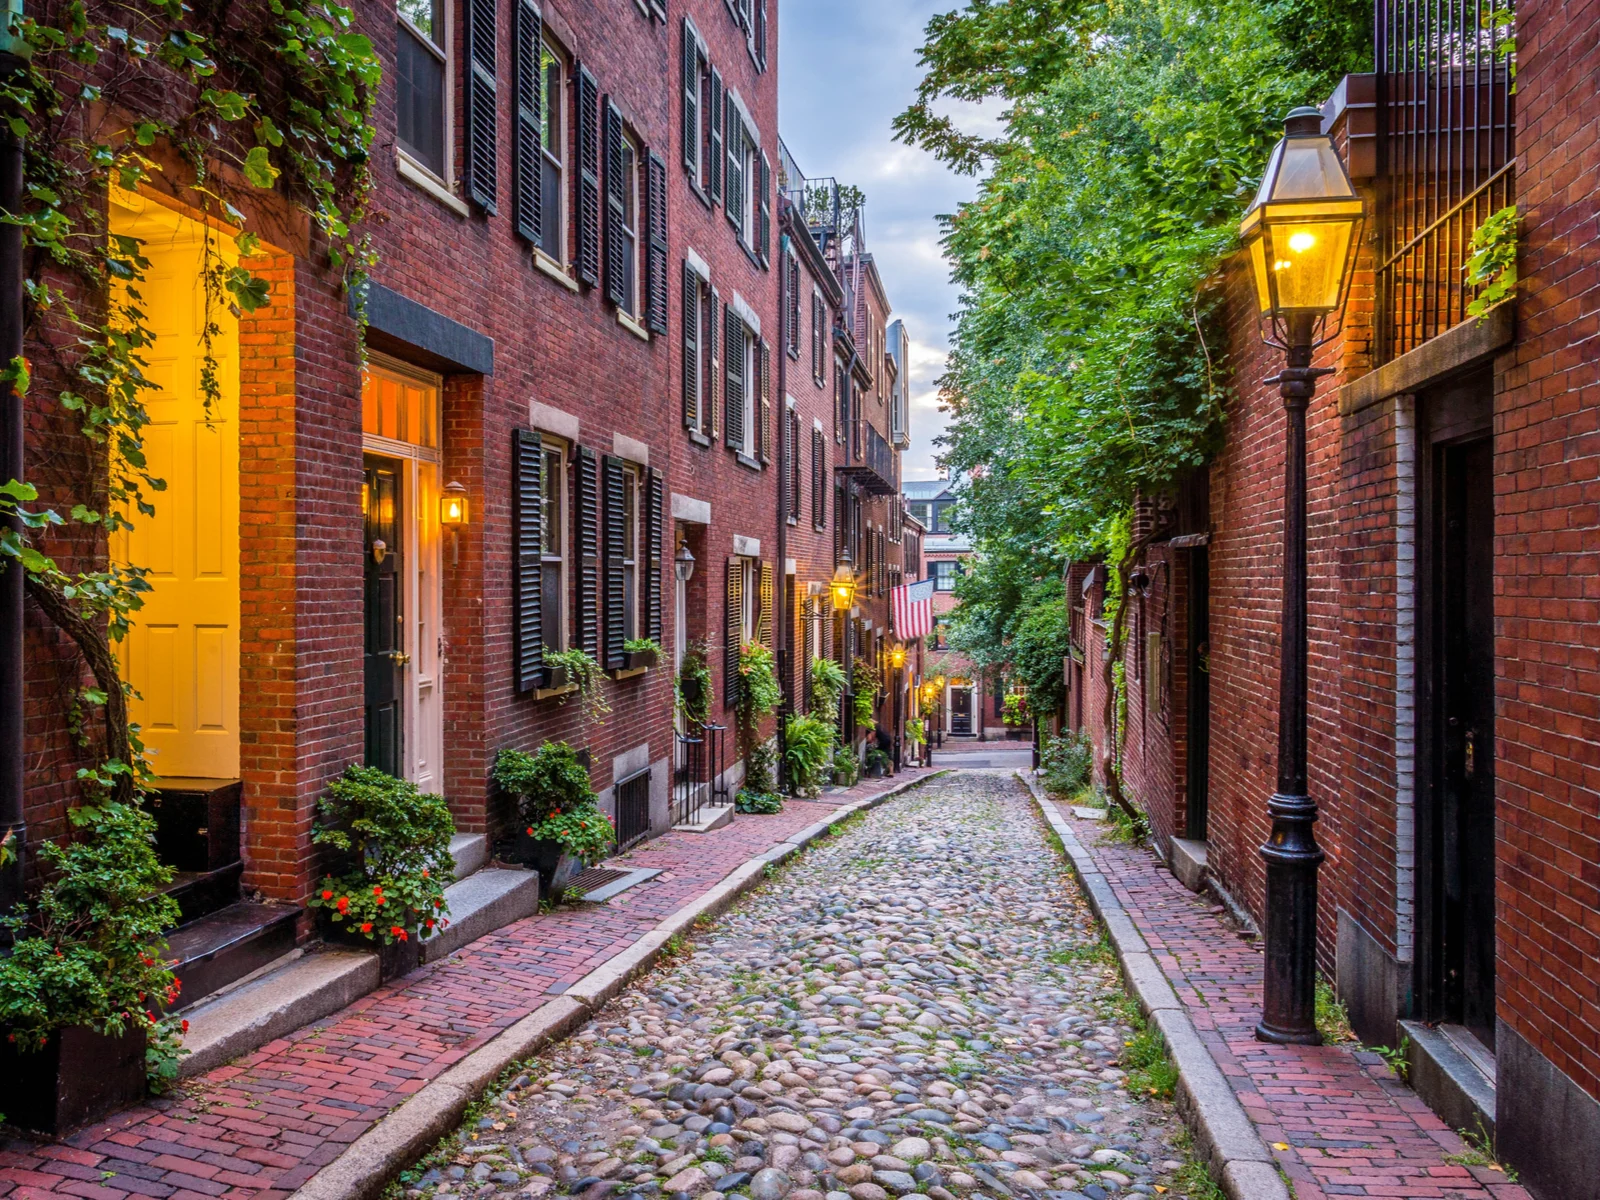 Acorn Street in Boston pictured during the least busy time to visit